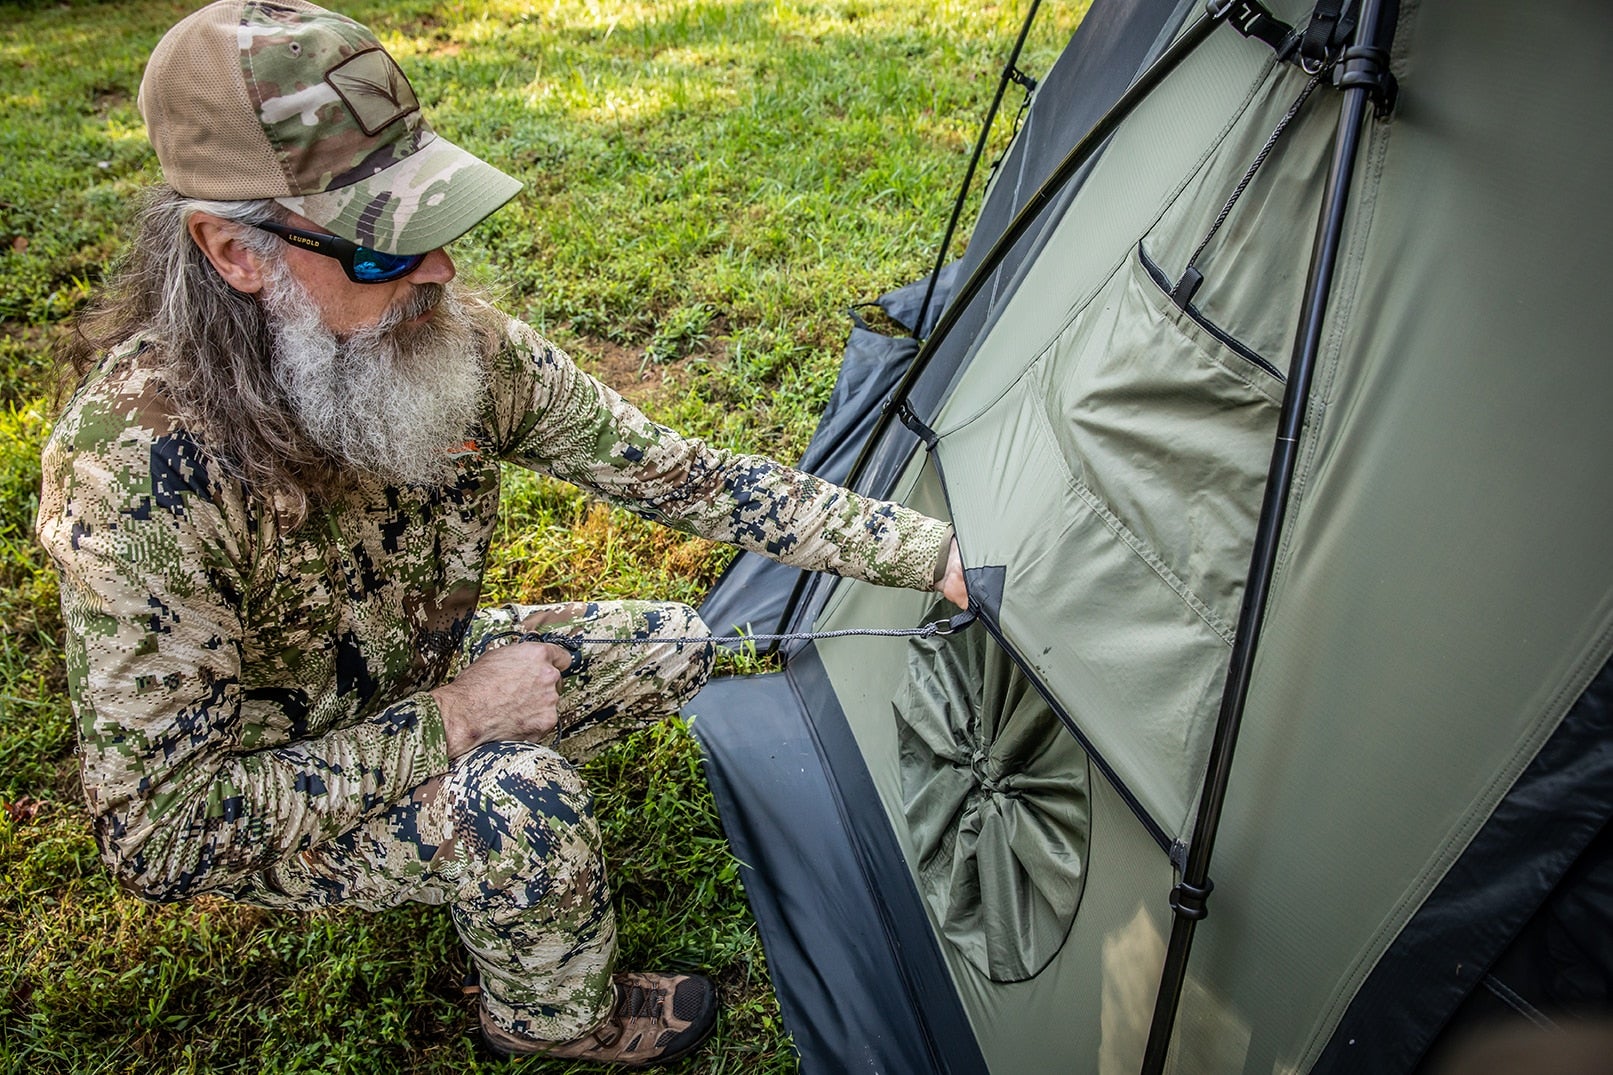 LiteFighter Introduces the Dragoon 8 Person 4 Season Tent